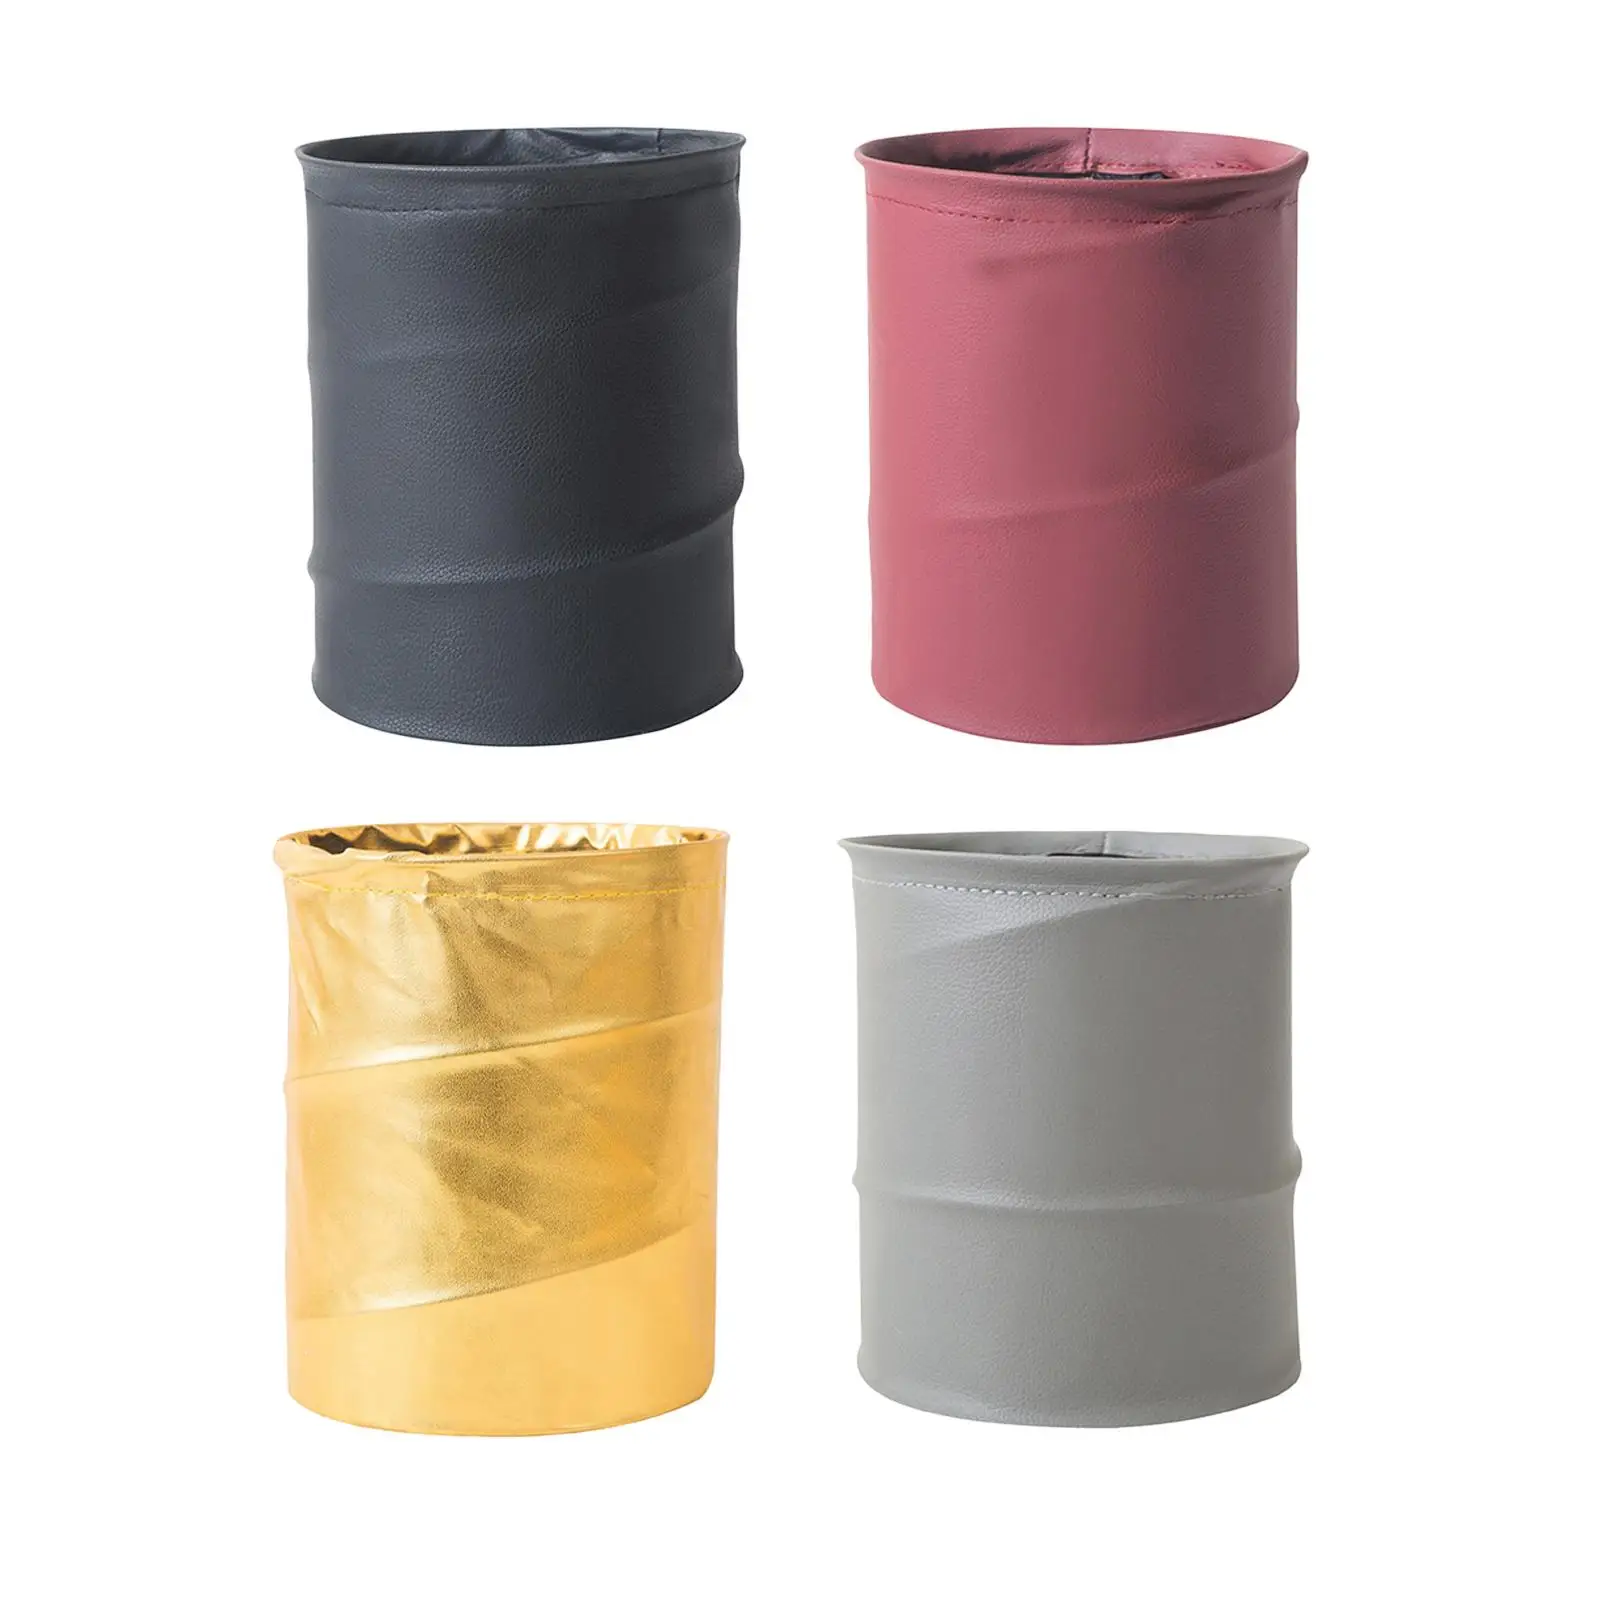 Portable Car Trash Can, Collapsible Waterproof PU Leather Multipurpose Garbage